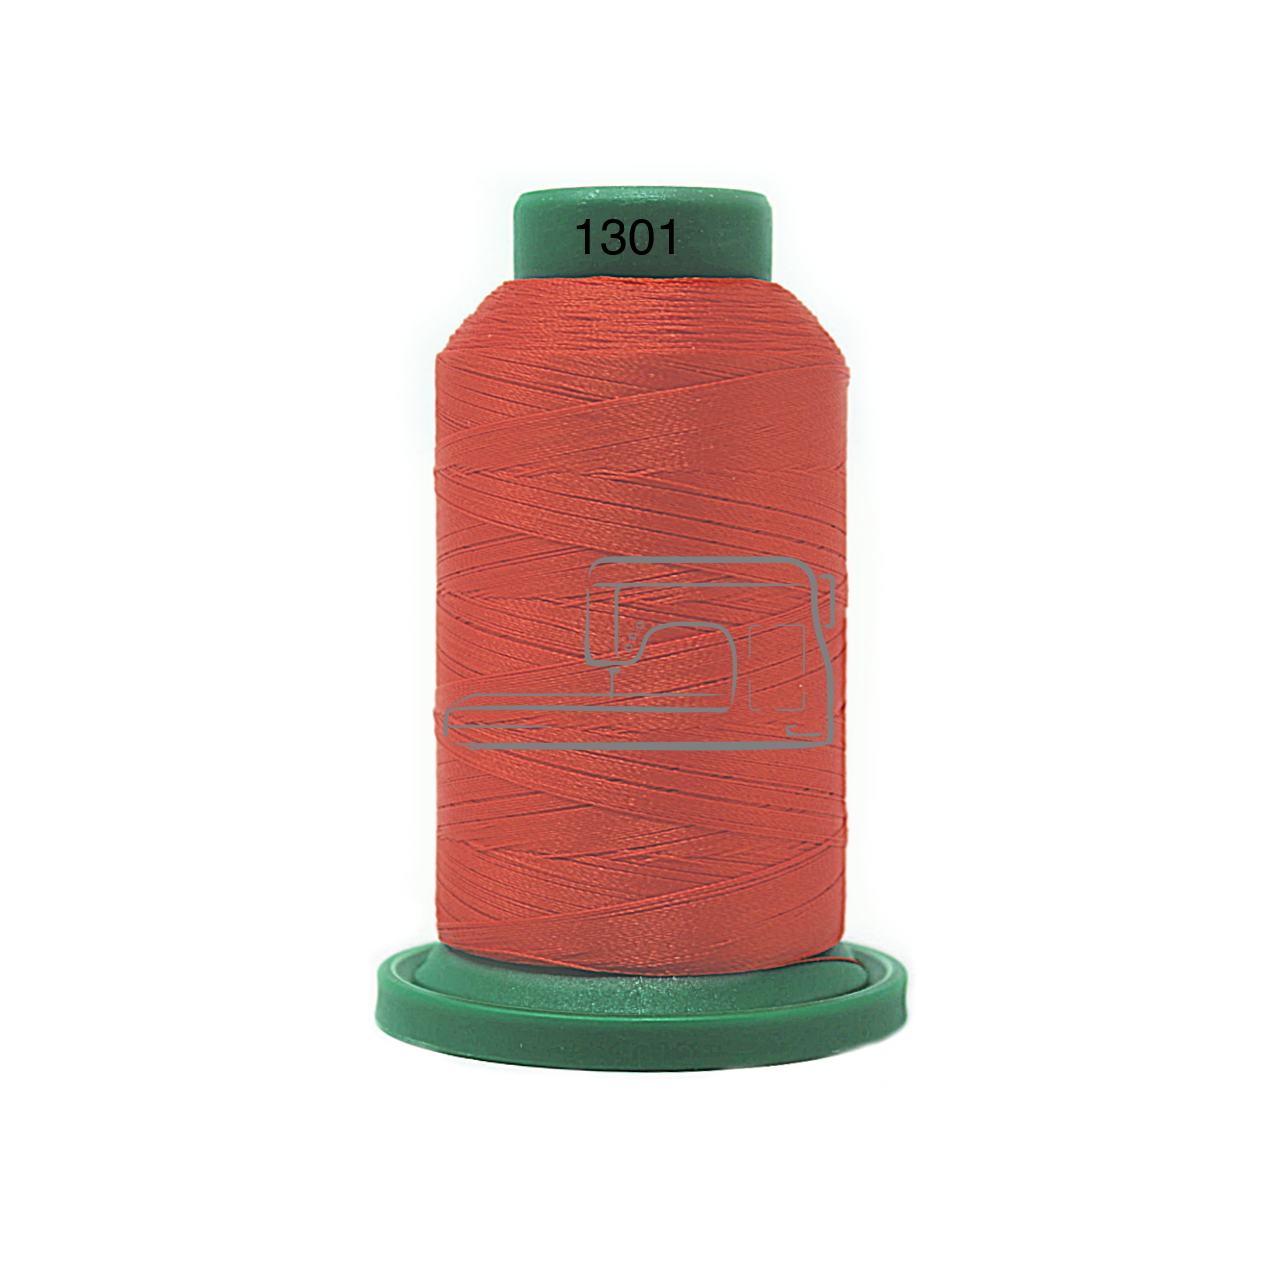 Isacord Isacord sewing and embroidery thread 1301